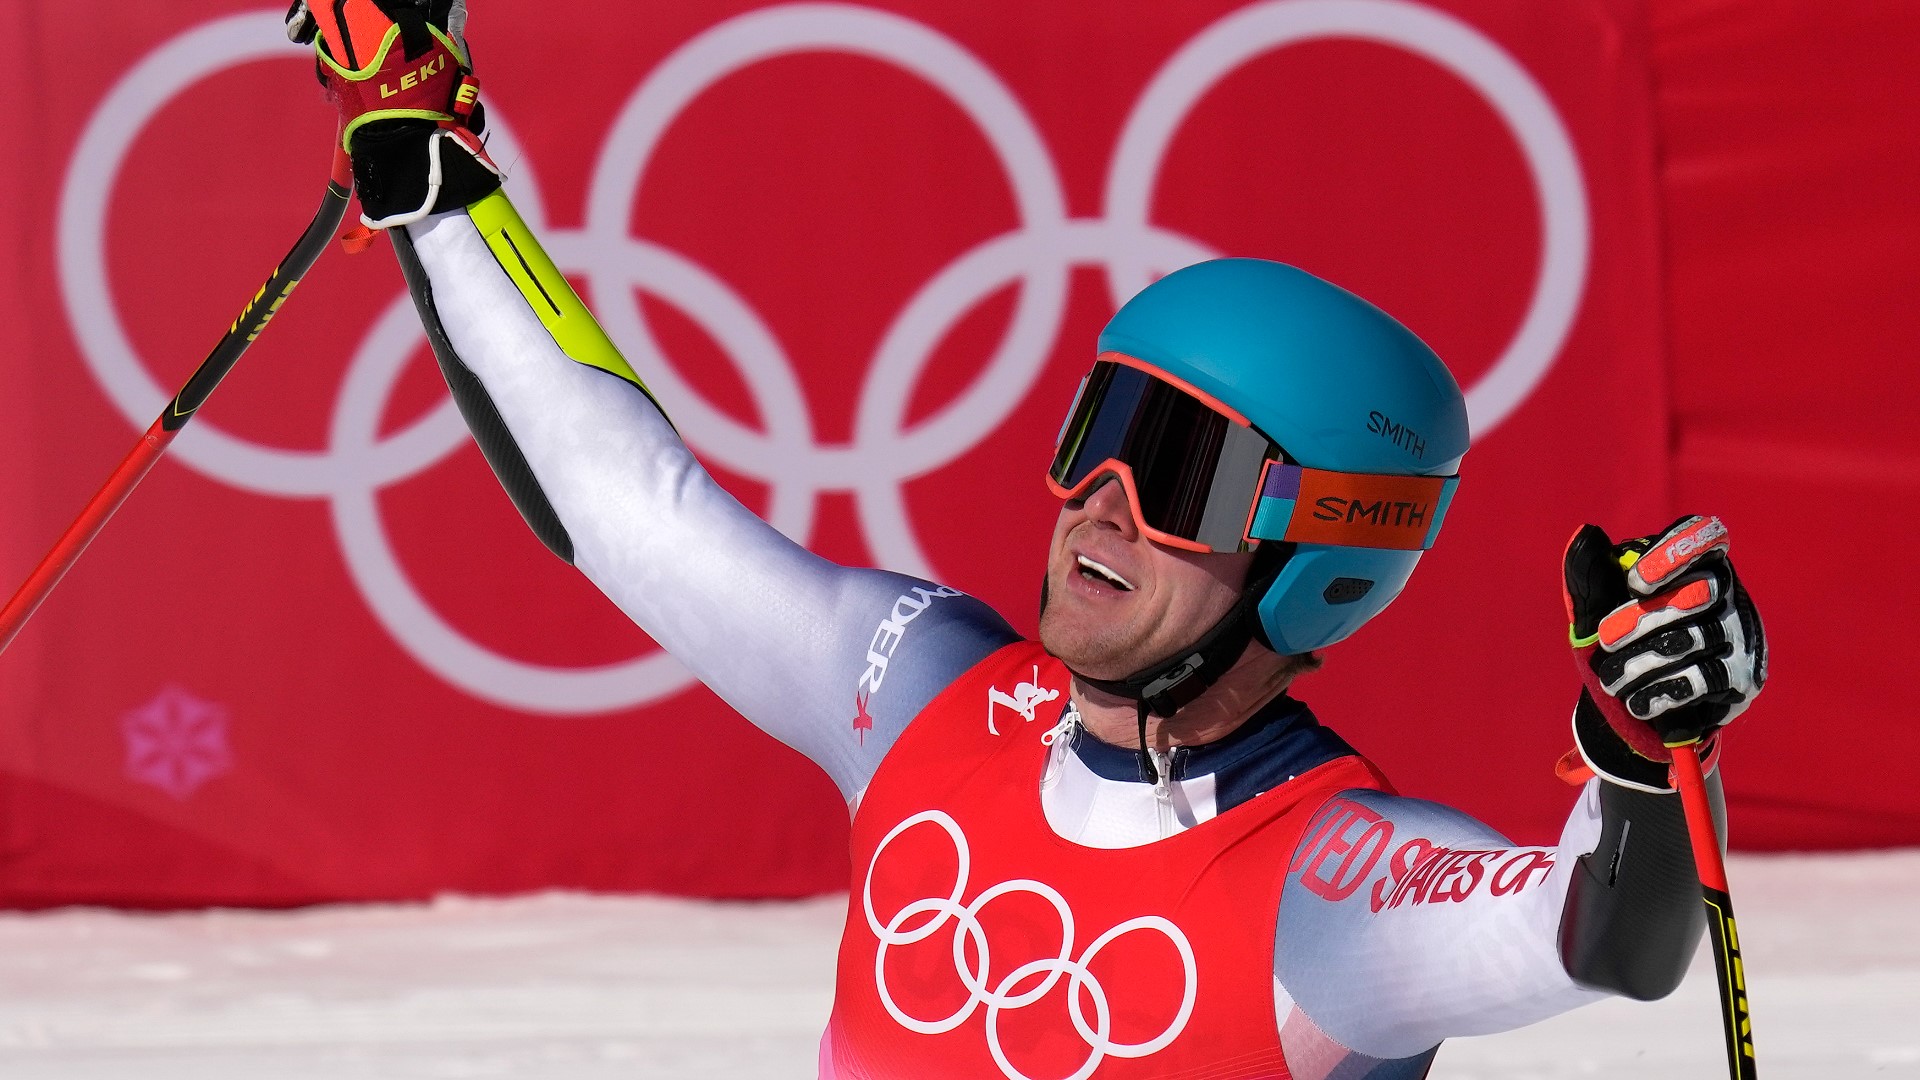 Ryan Cochran-Siegle won a silver medal for USA in the super-G run 50 years after his mom won a gold medal. Watch the award-winning moment here.